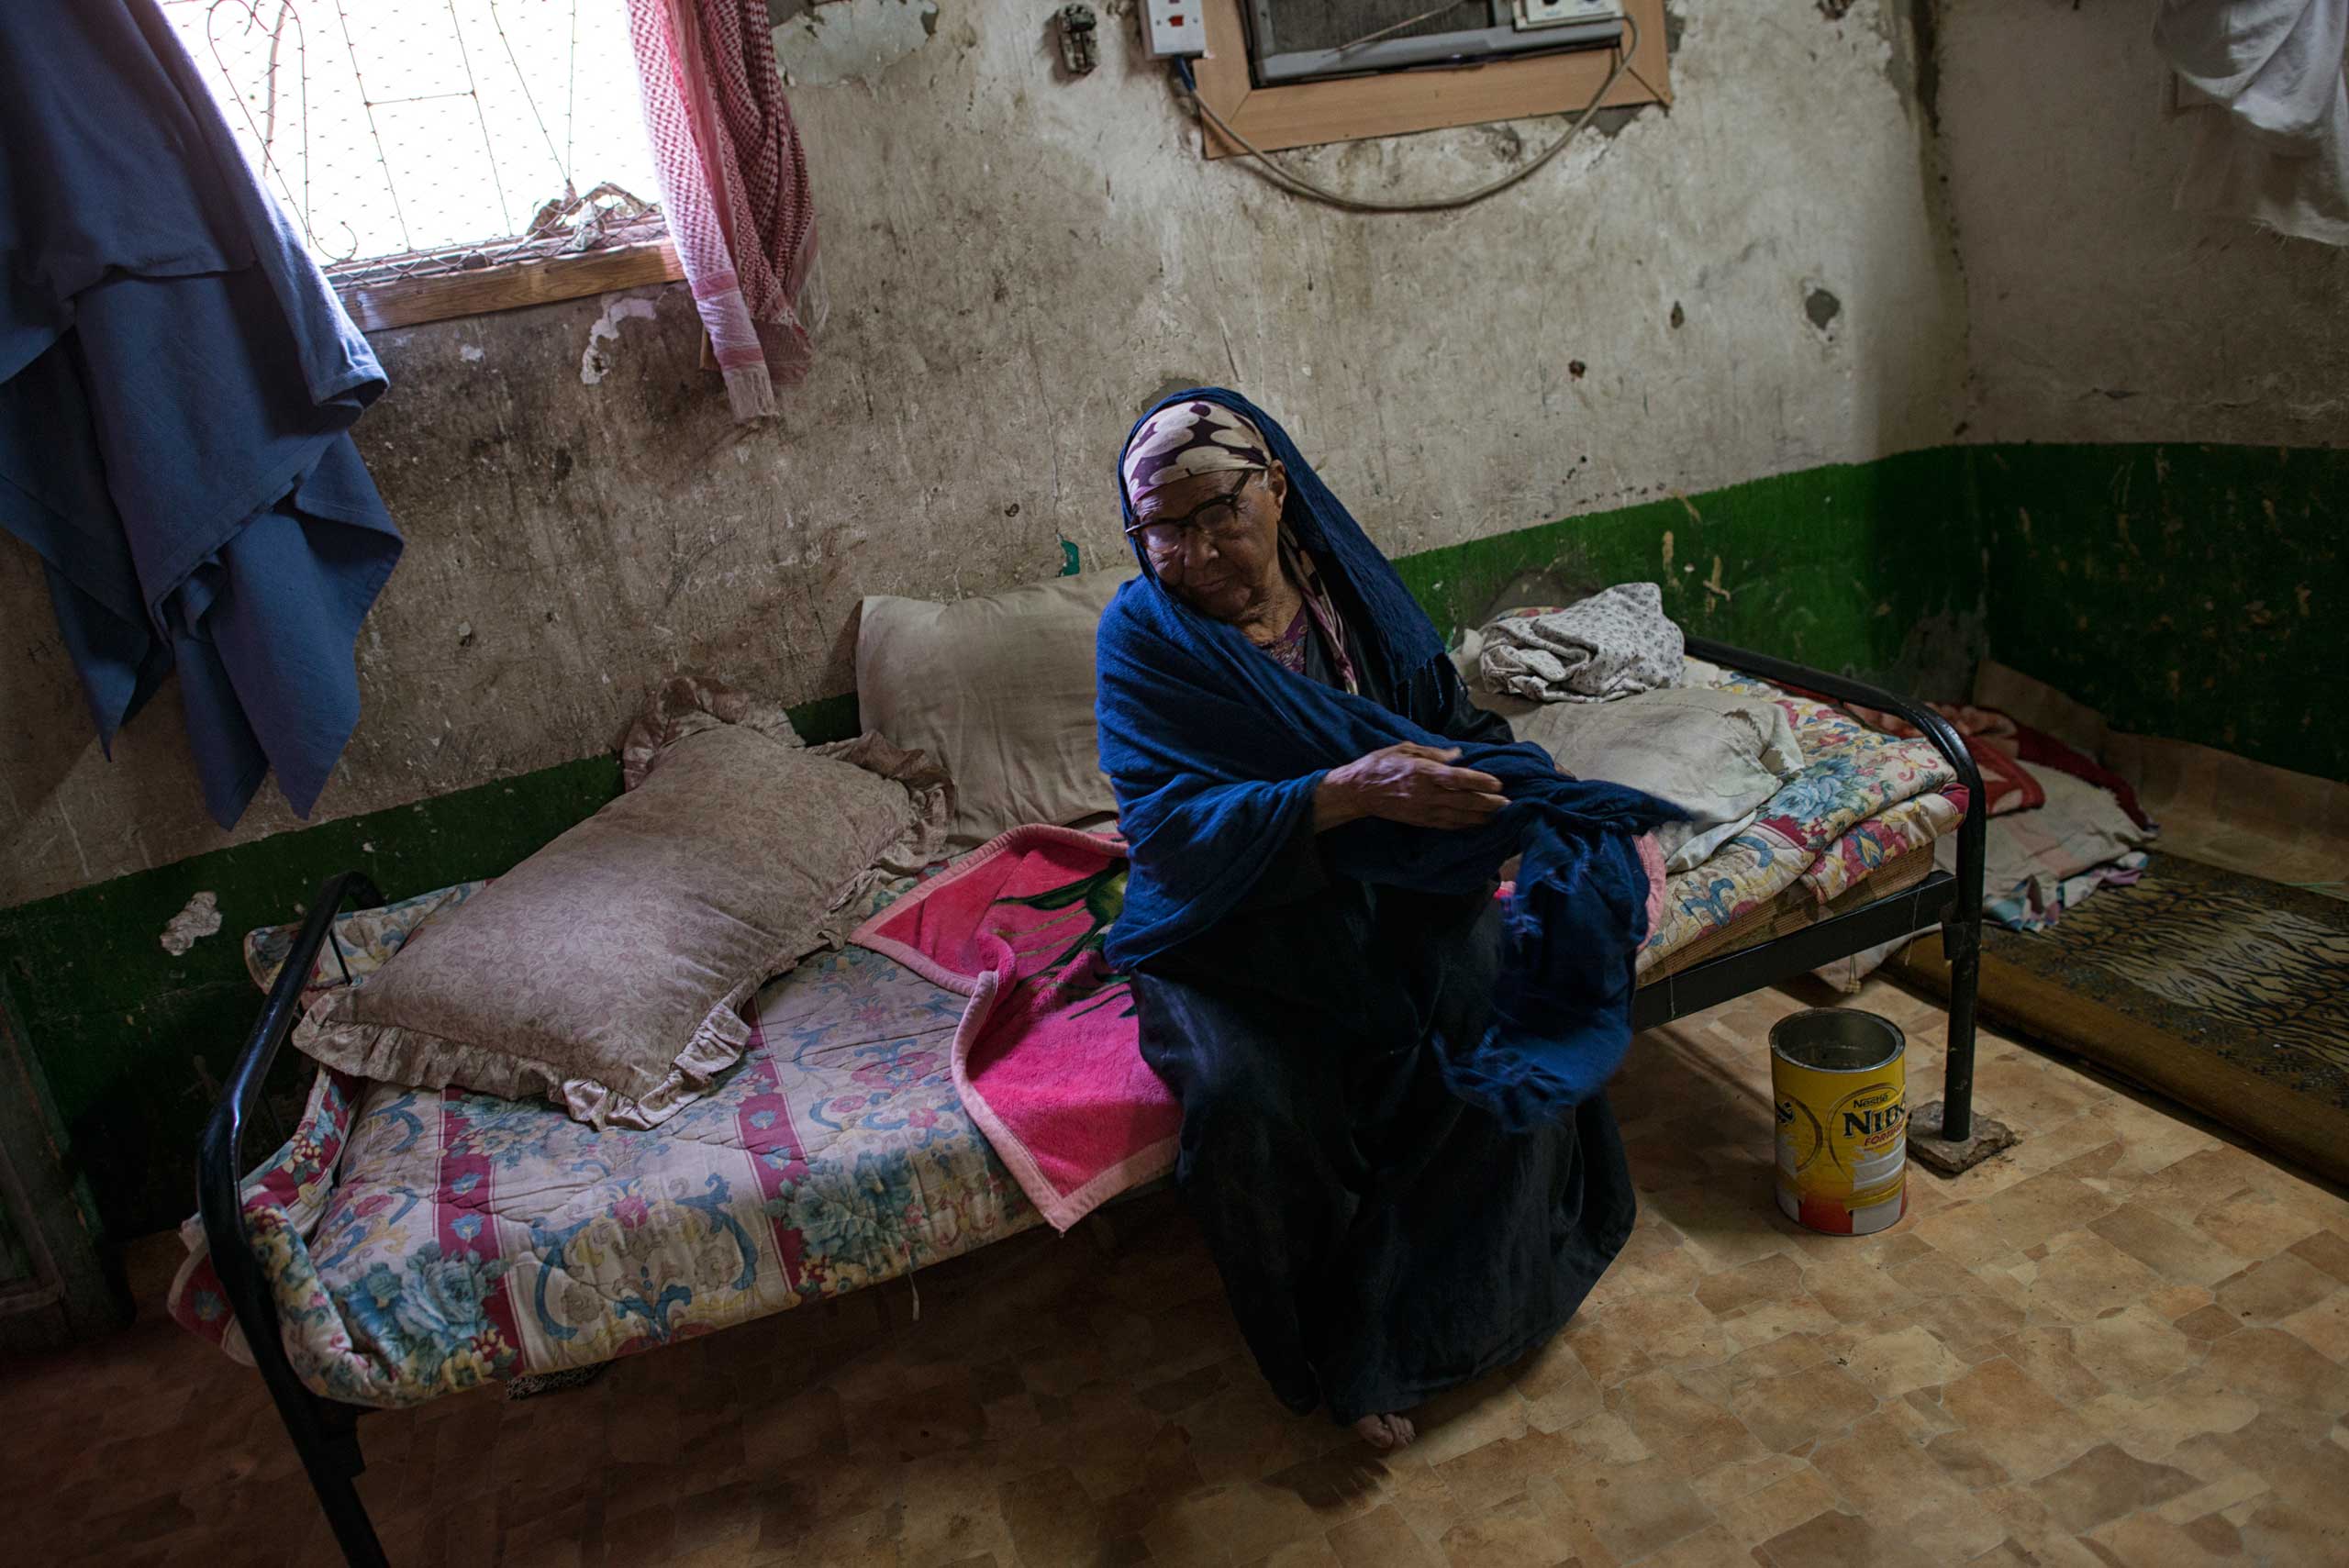 Selma Saleh, an impoverished Saudi woman, sits on her bed in her home in South Riyadh.